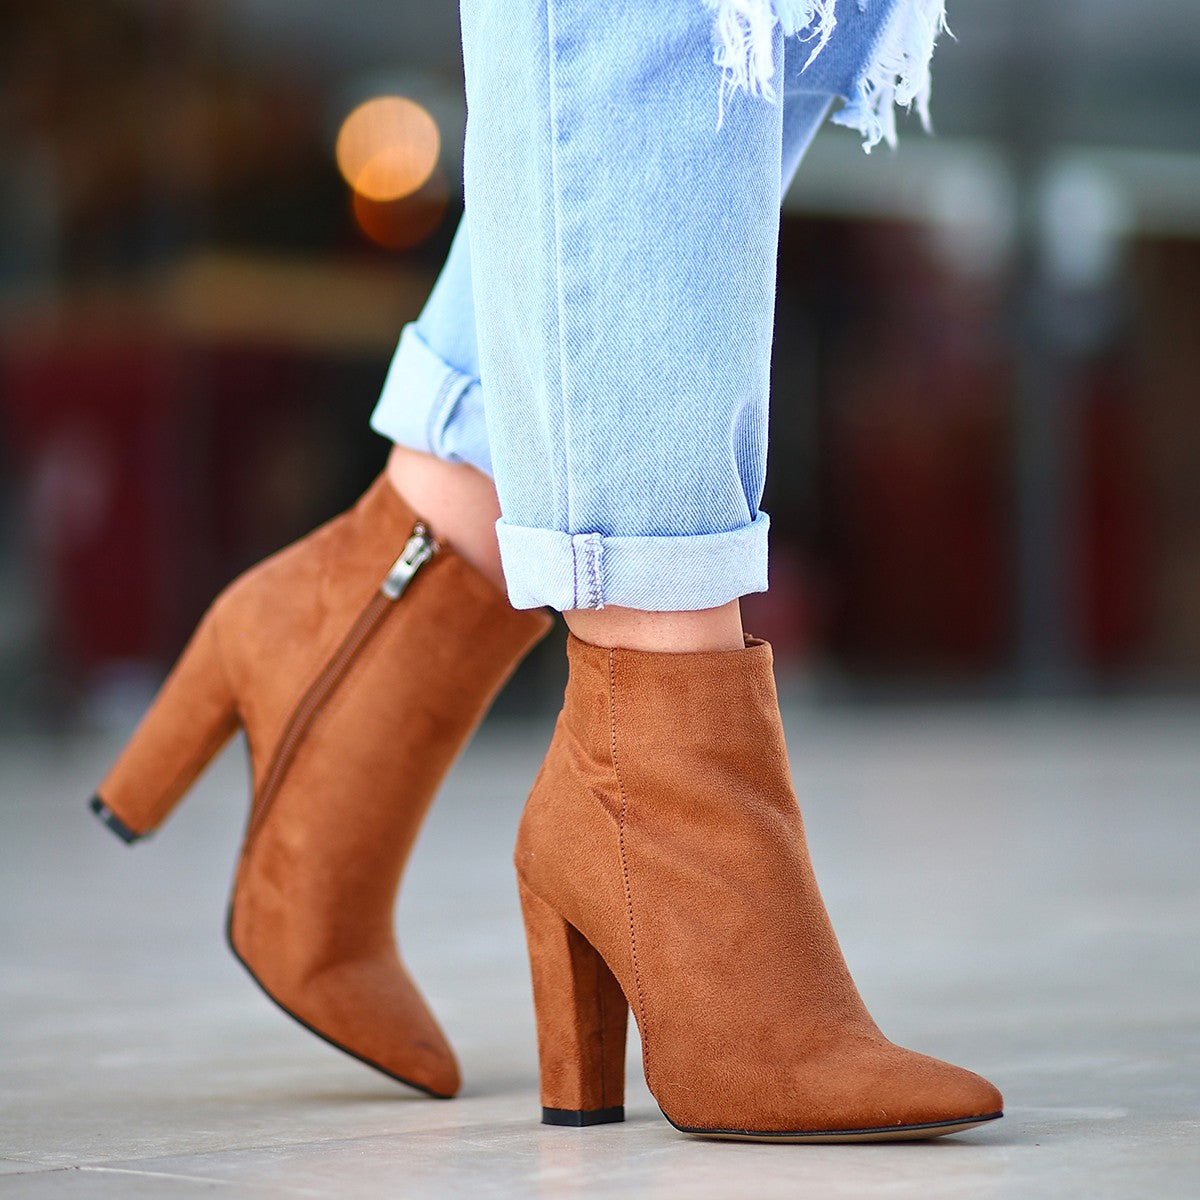 Women's Tan Suede Heeled Boots - STREETMODE ™